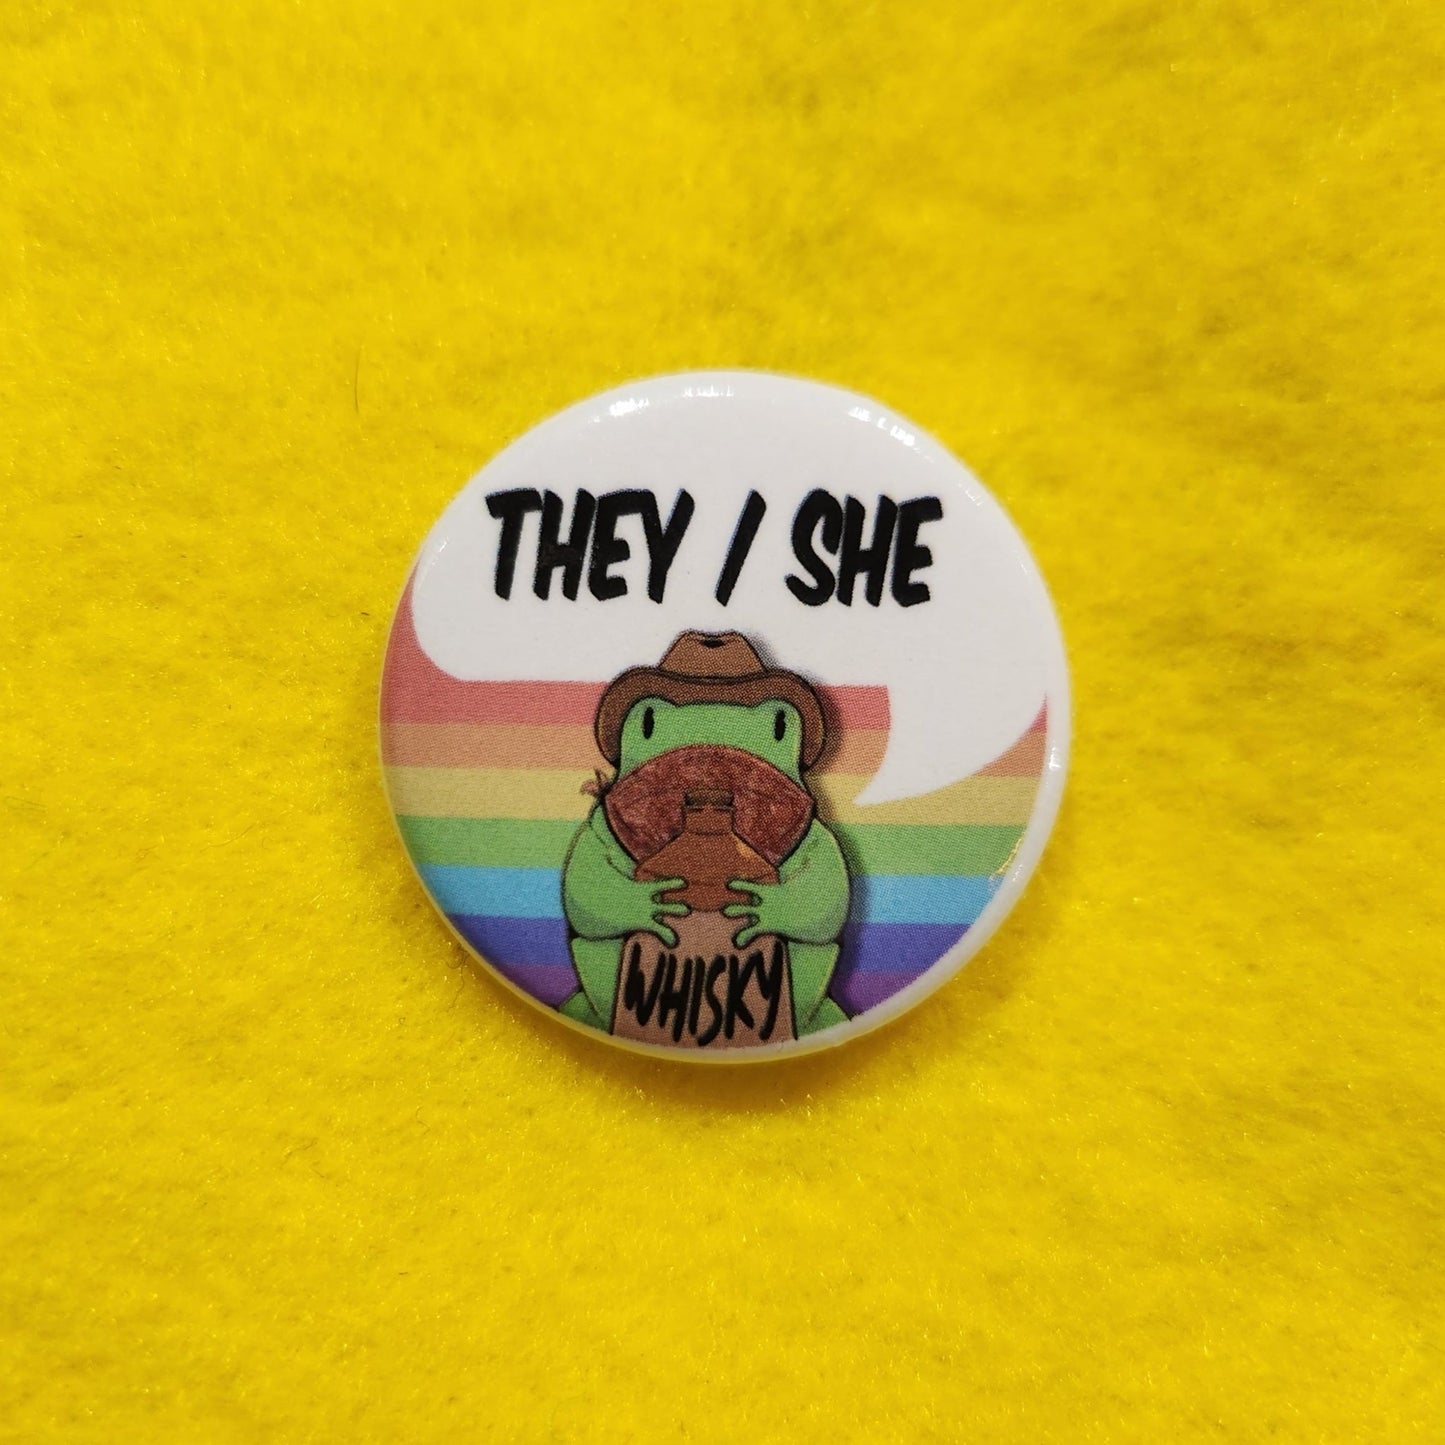 Whisky Frog Pronoun Button | THEY/SHE | 1.25" - Deviantkreations